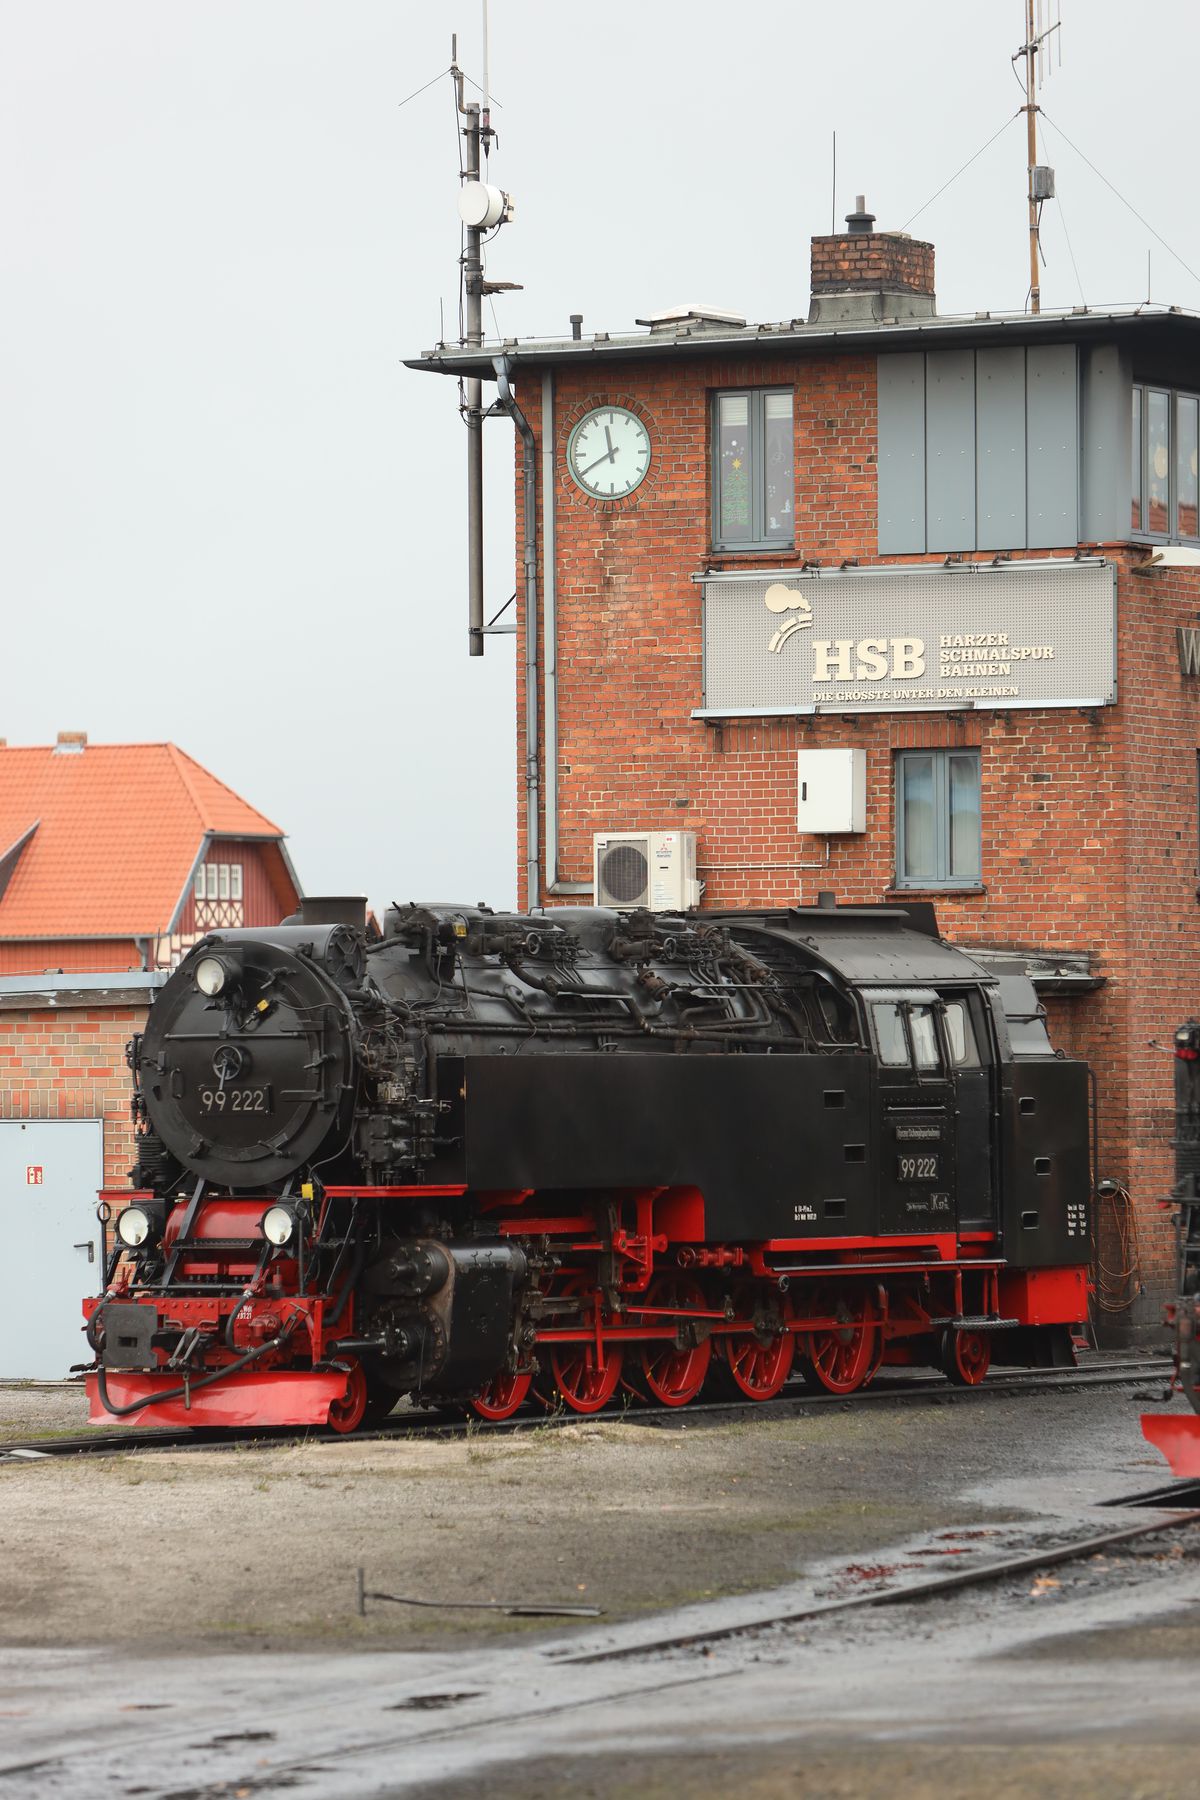 Train service to the Brocken suspended